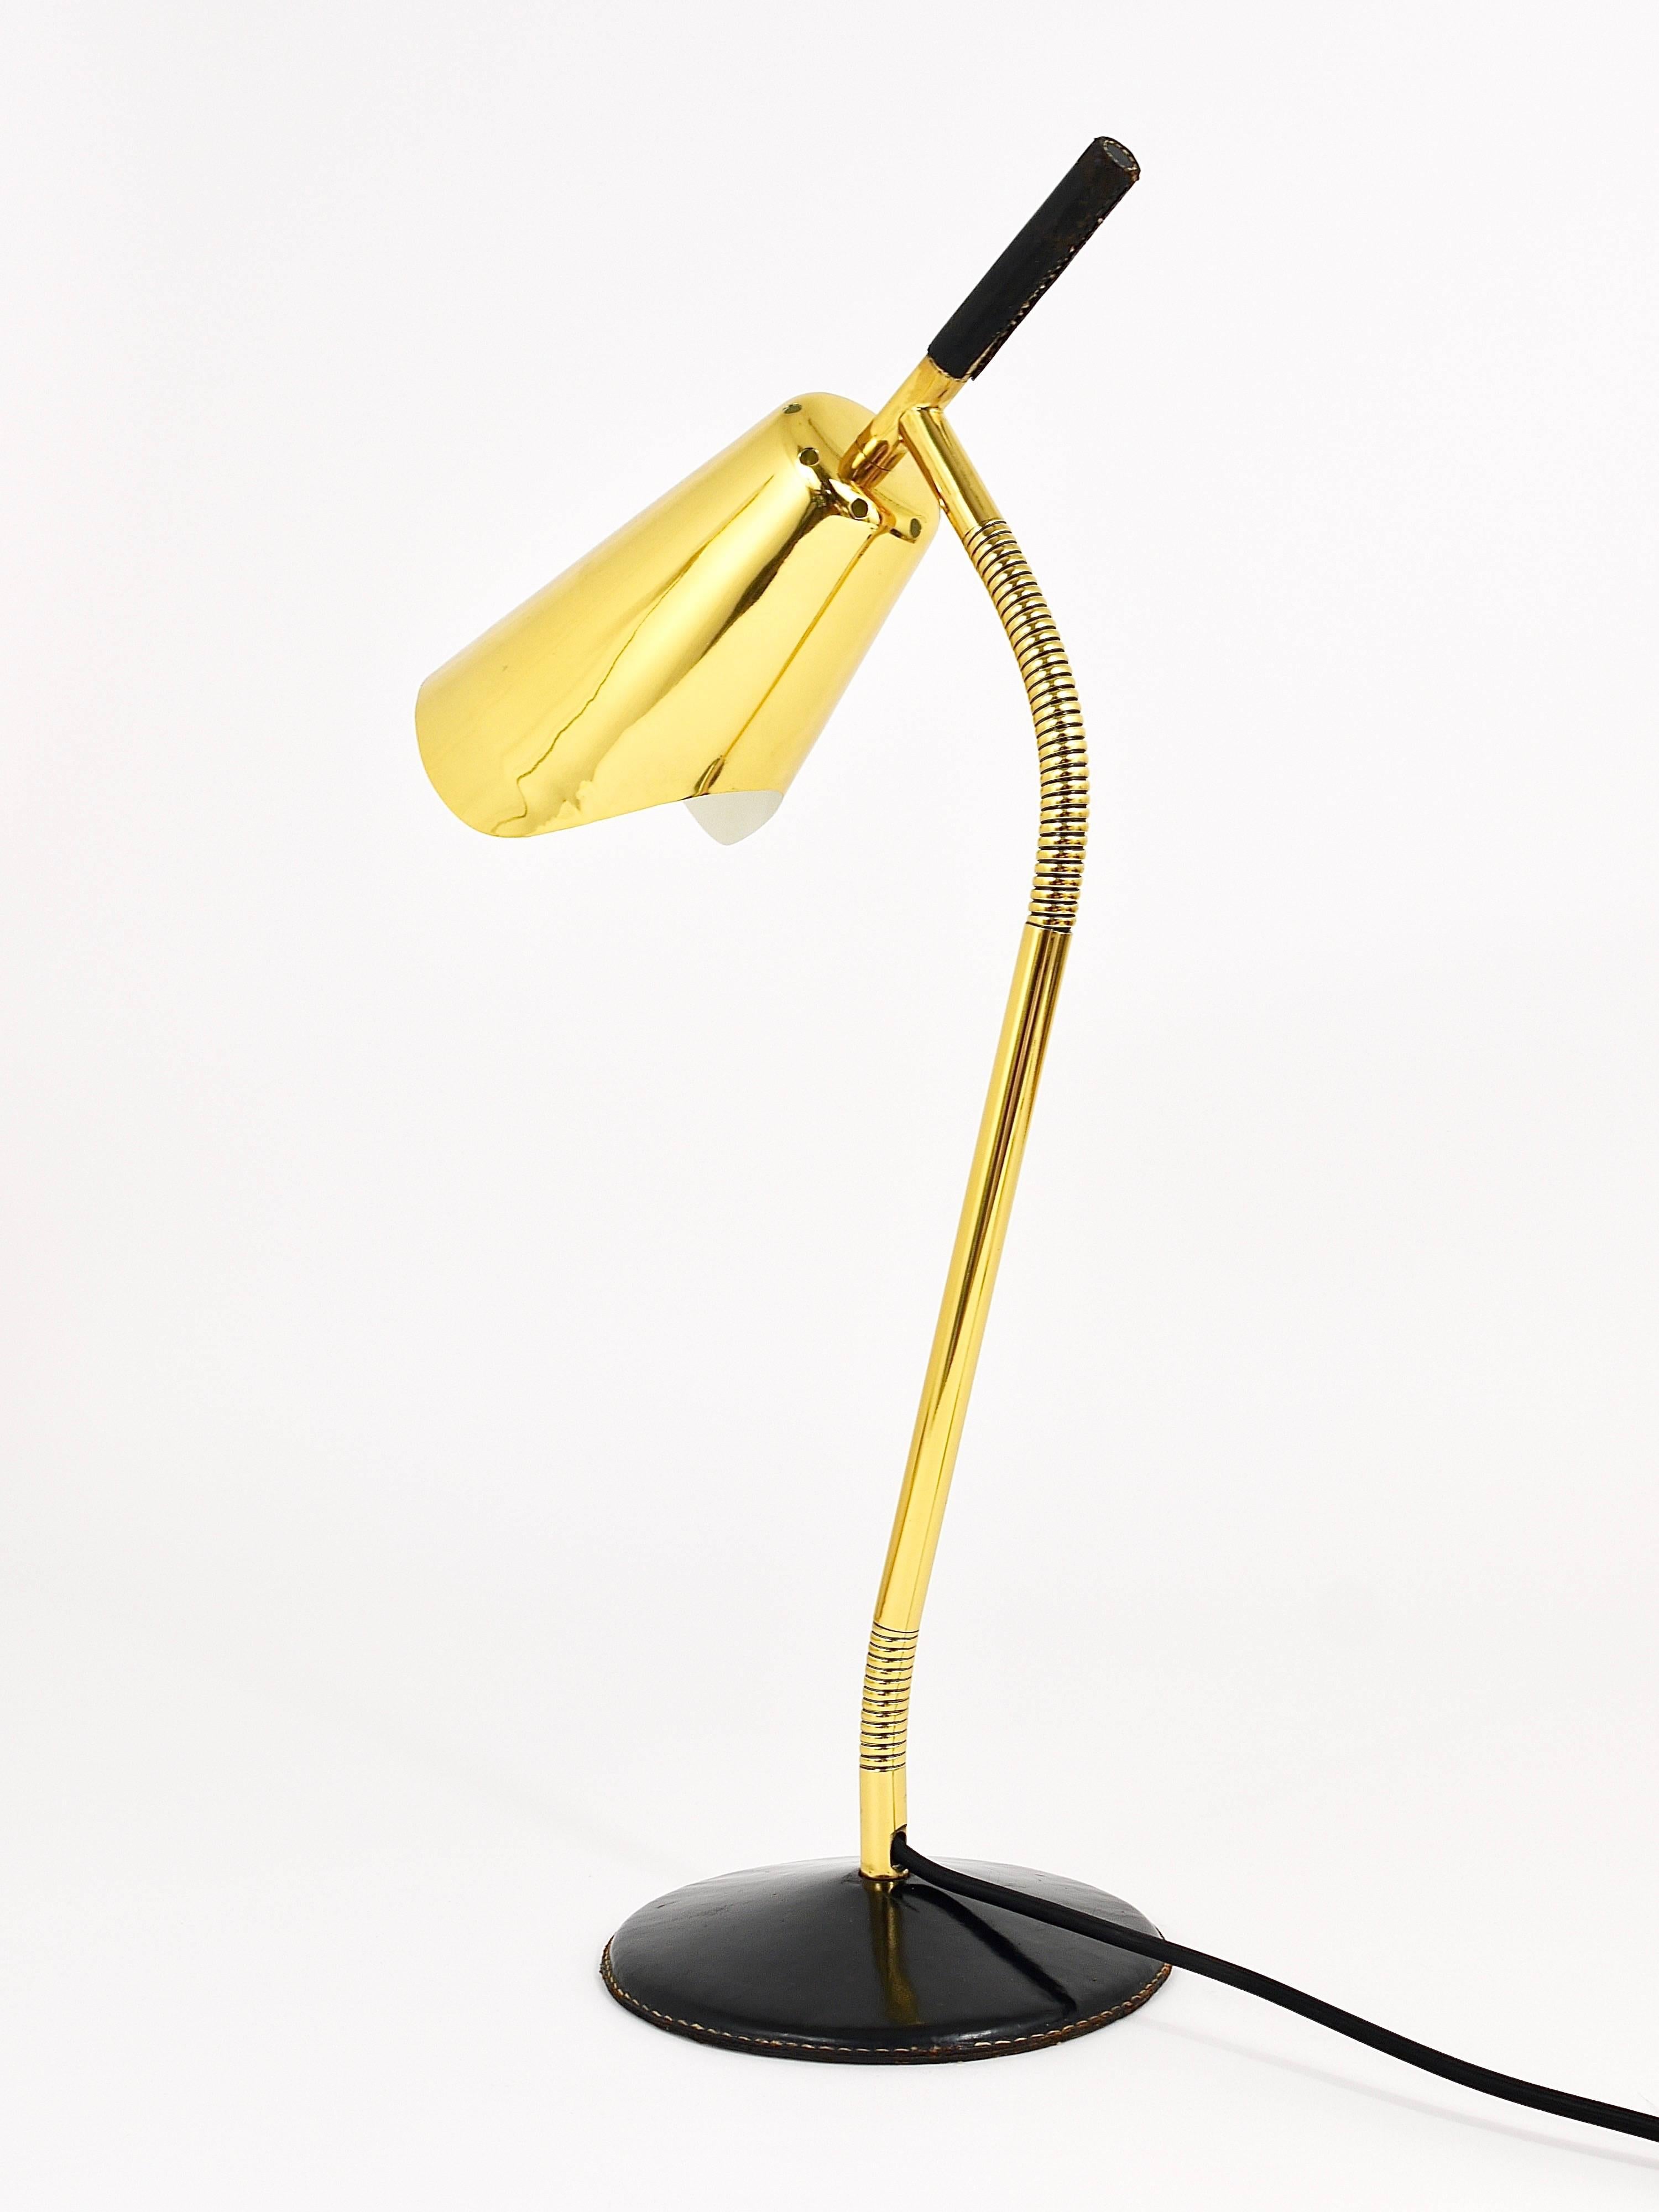 We are proud to offer this very rare and beautiful table or desk lamp from the 1950s. Designed and executed by Carl Aubock, Austria. This lamp is made of brass and has a leather-covered base and handle on its top. Straight and simple but functional